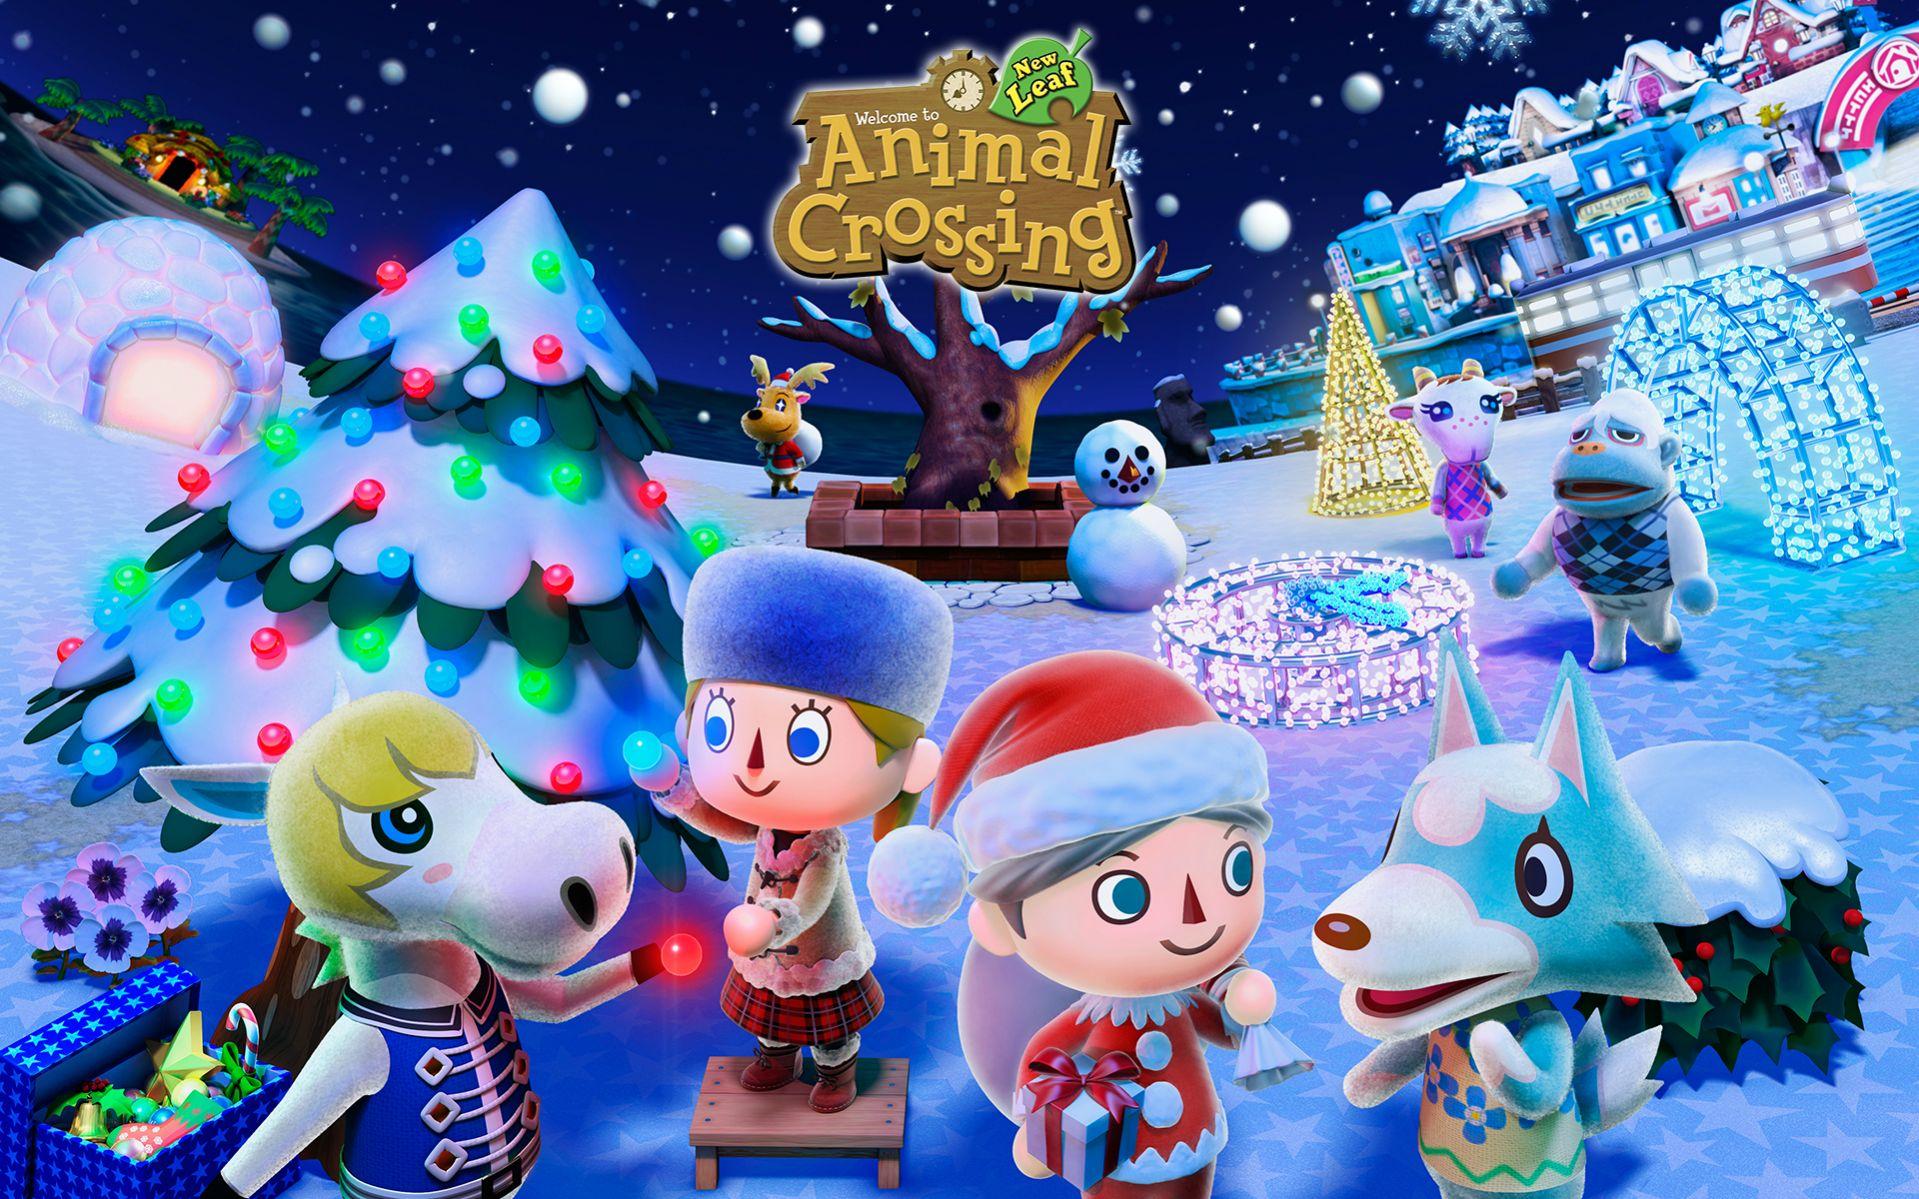 Animal Crossing Christmas themed wallpaper for those